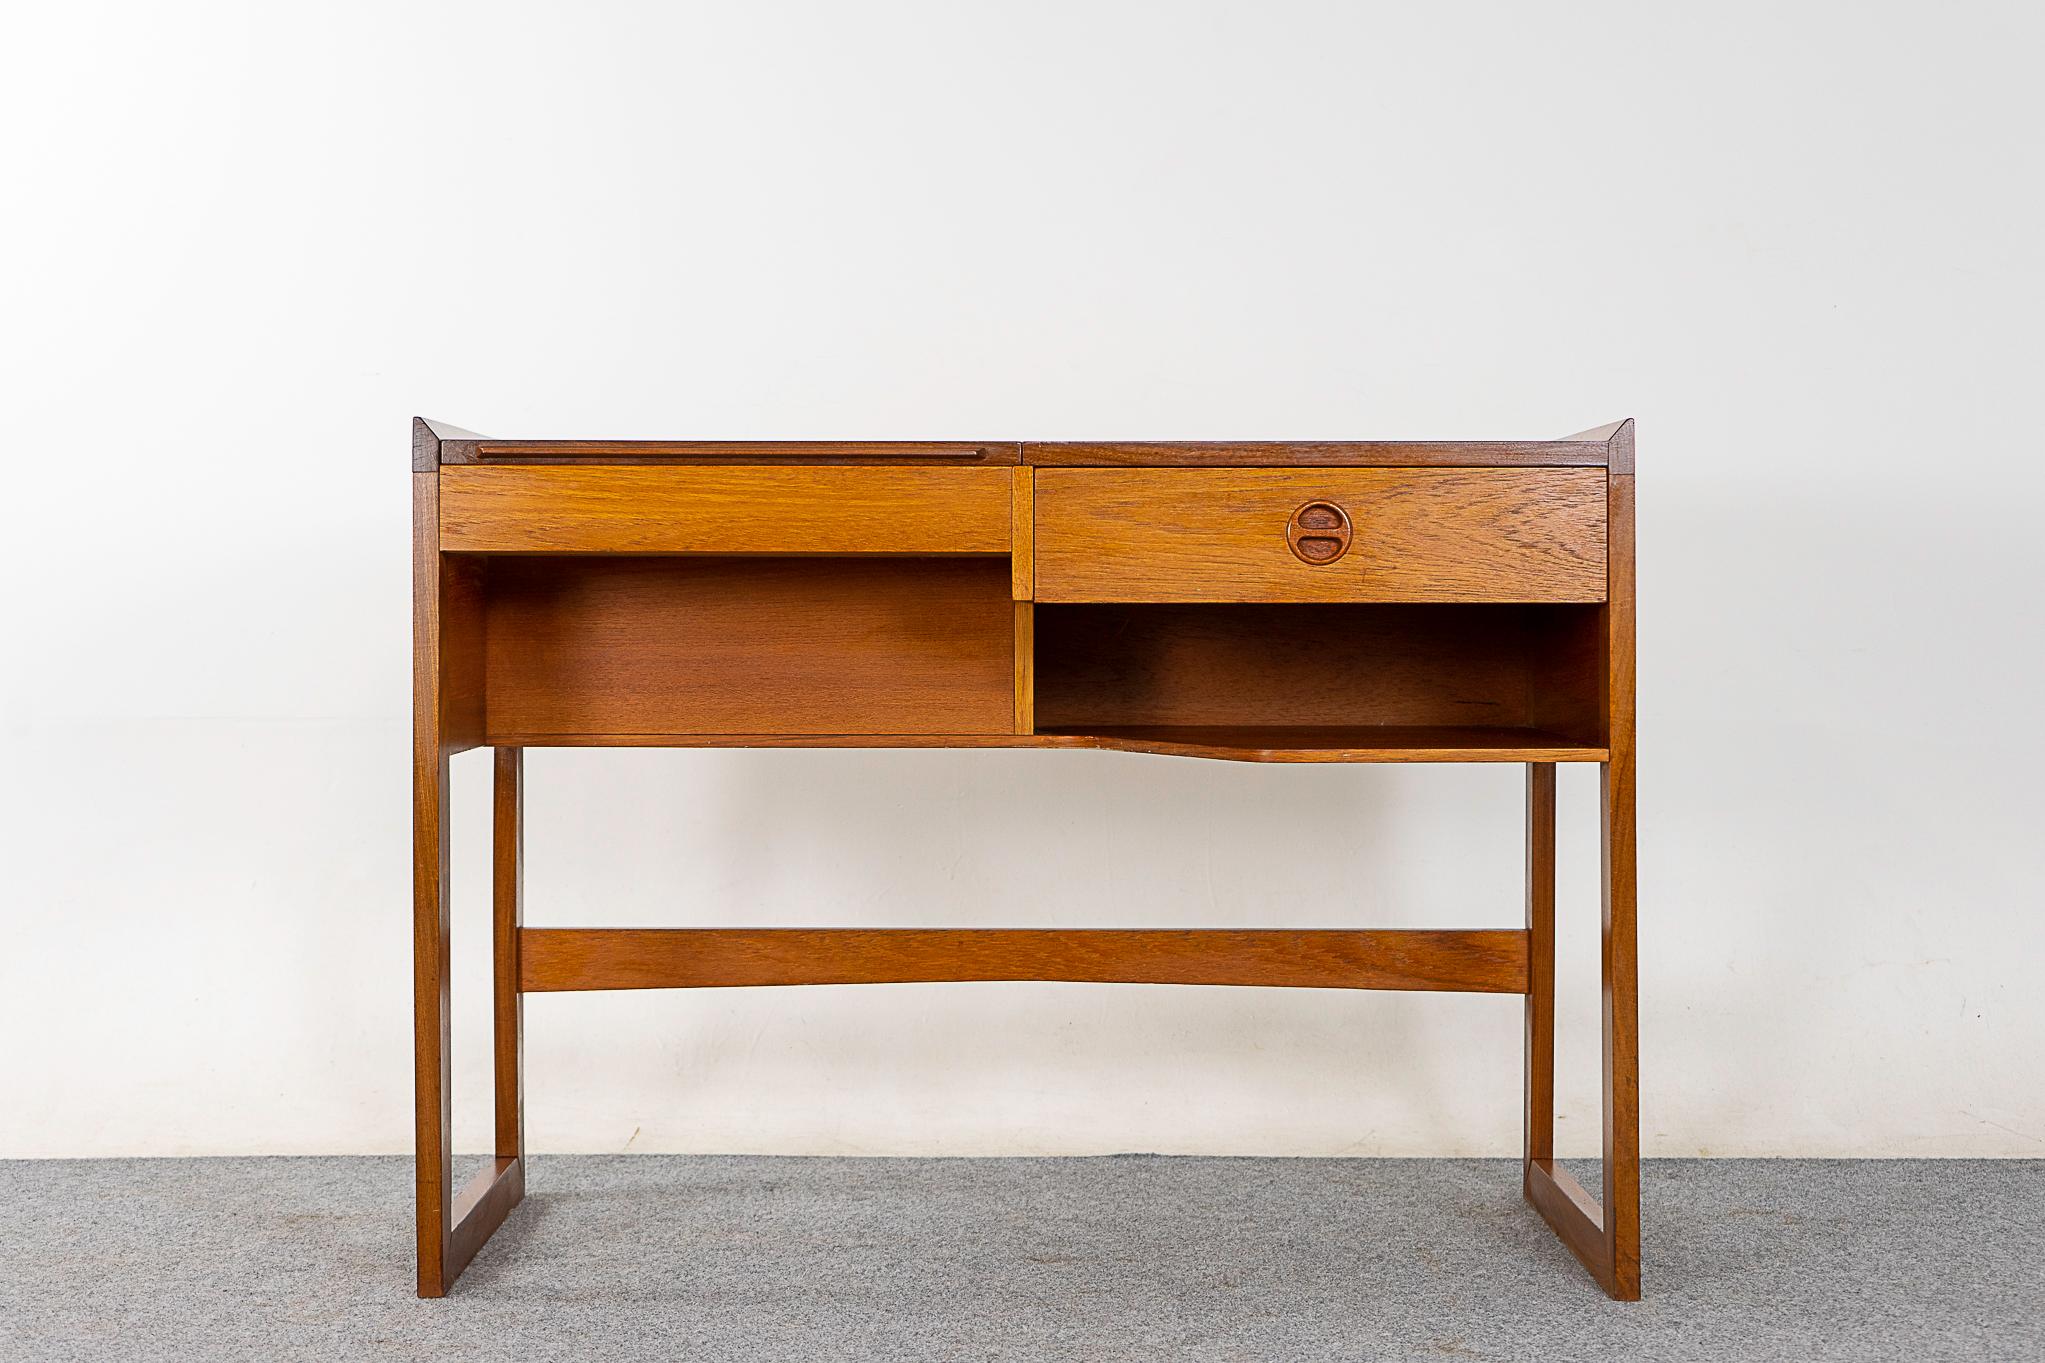 Teak vanity by Arne Wahl Iversen for Ikea, circa 1960s. Compact vanity with solid wood trim and dovetail construction. Platform lifts to reveal mirror and fitted interior storage.

Unrestored item, some marks consistent with age.

Please inquire for